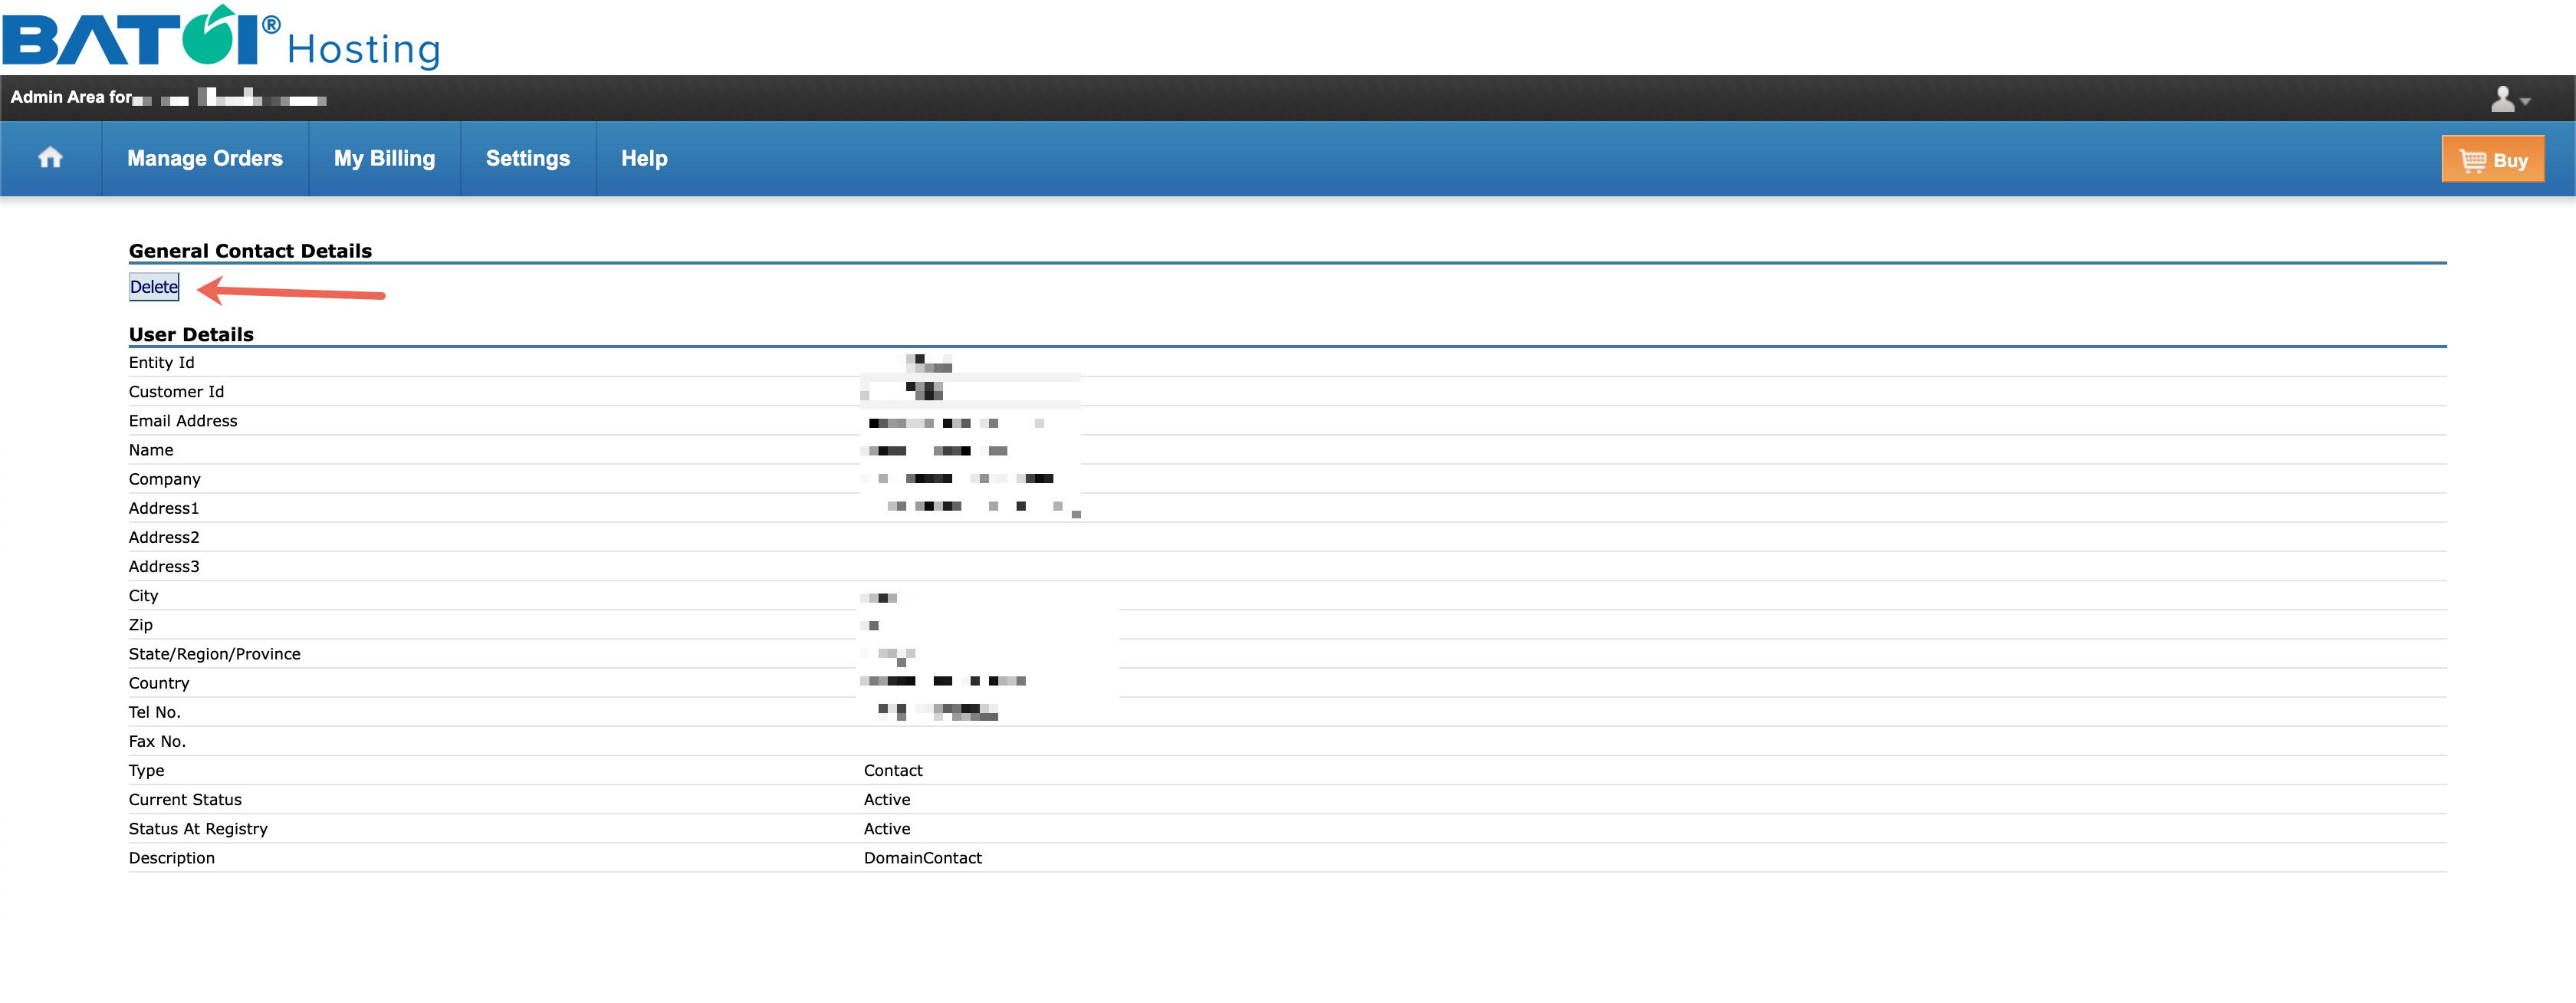 Figure 7: My Batoi Hosting Individual Contact View Page